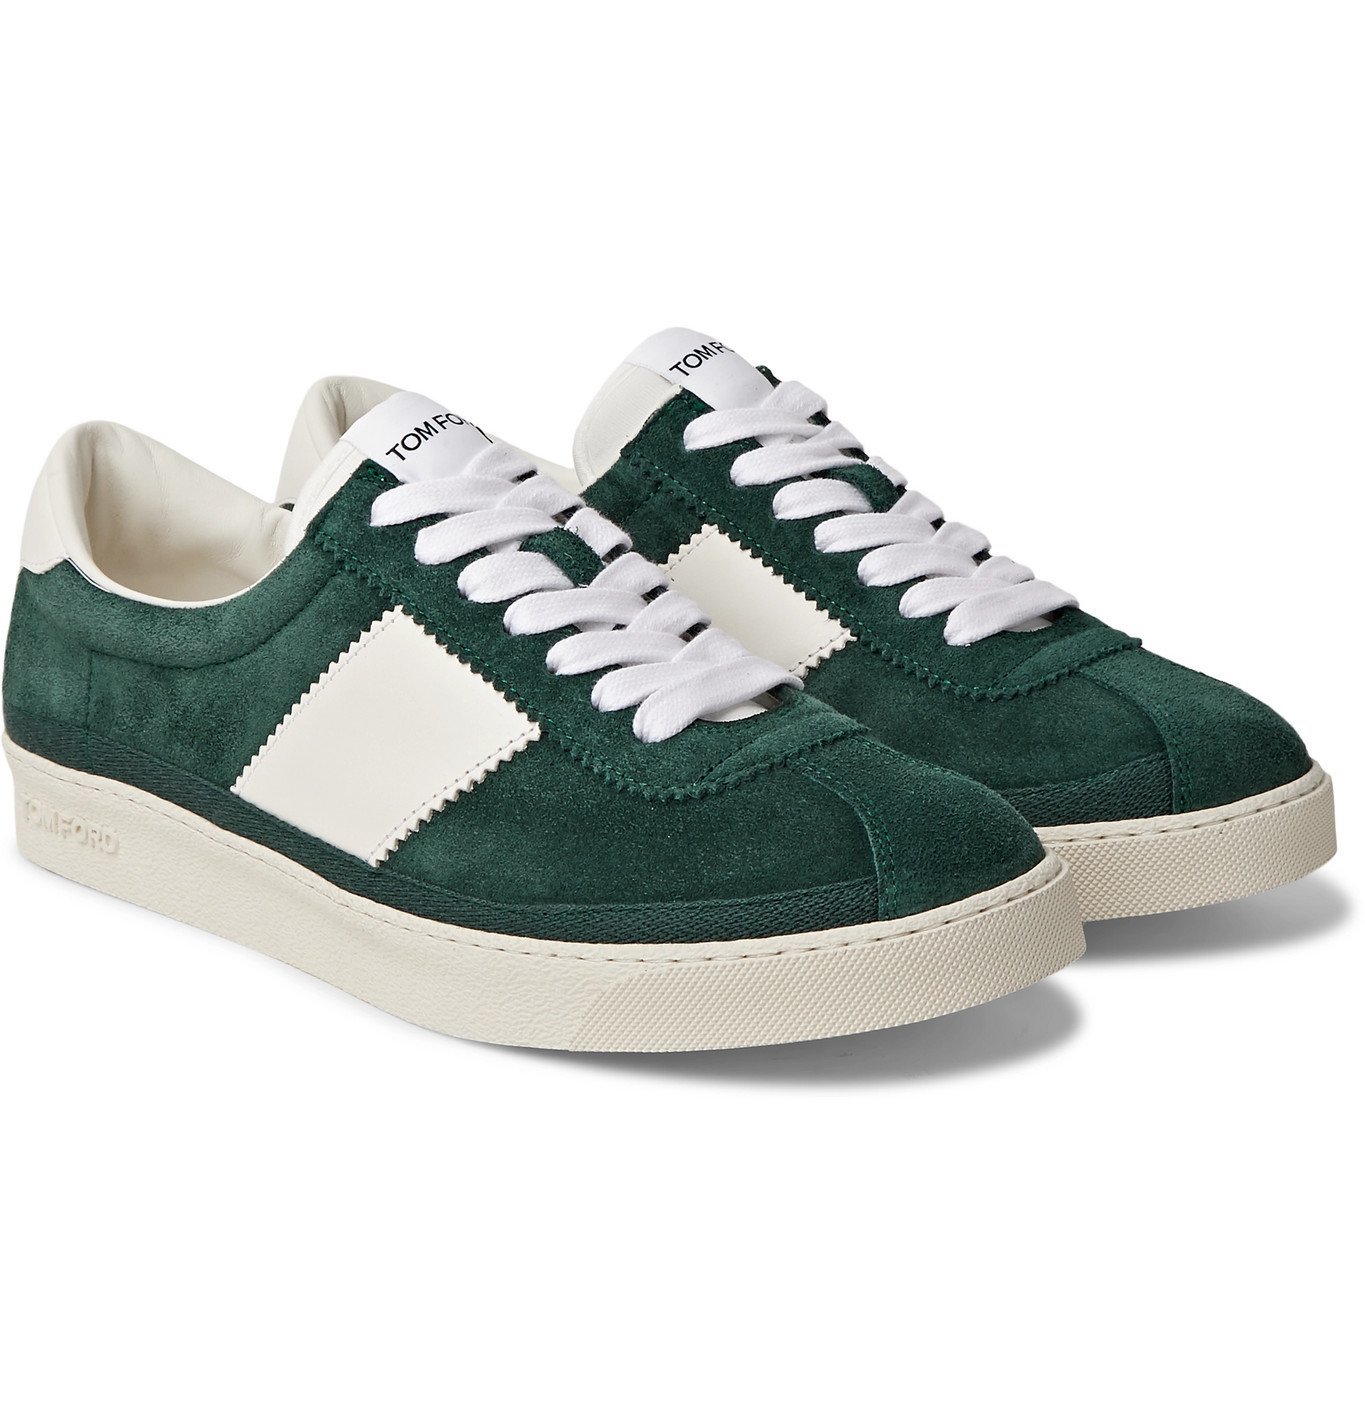 TOM FORD - Bannister Leather-Trimmed Suede Sneakers - Green TOM FORD